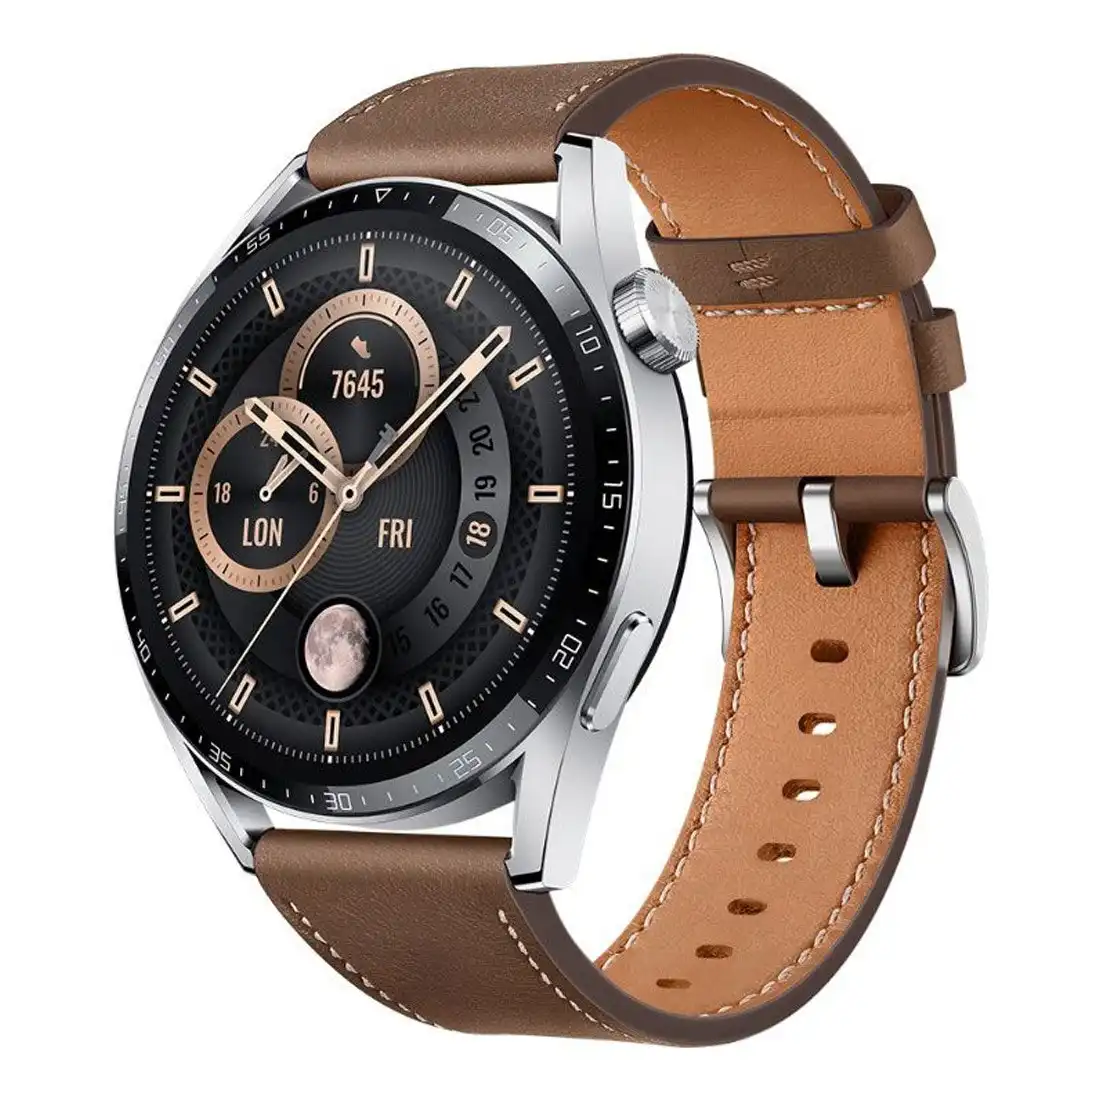 Huawei WATCH GT 3 Classic with Leather Strap 46mm Smart Watch - Brown